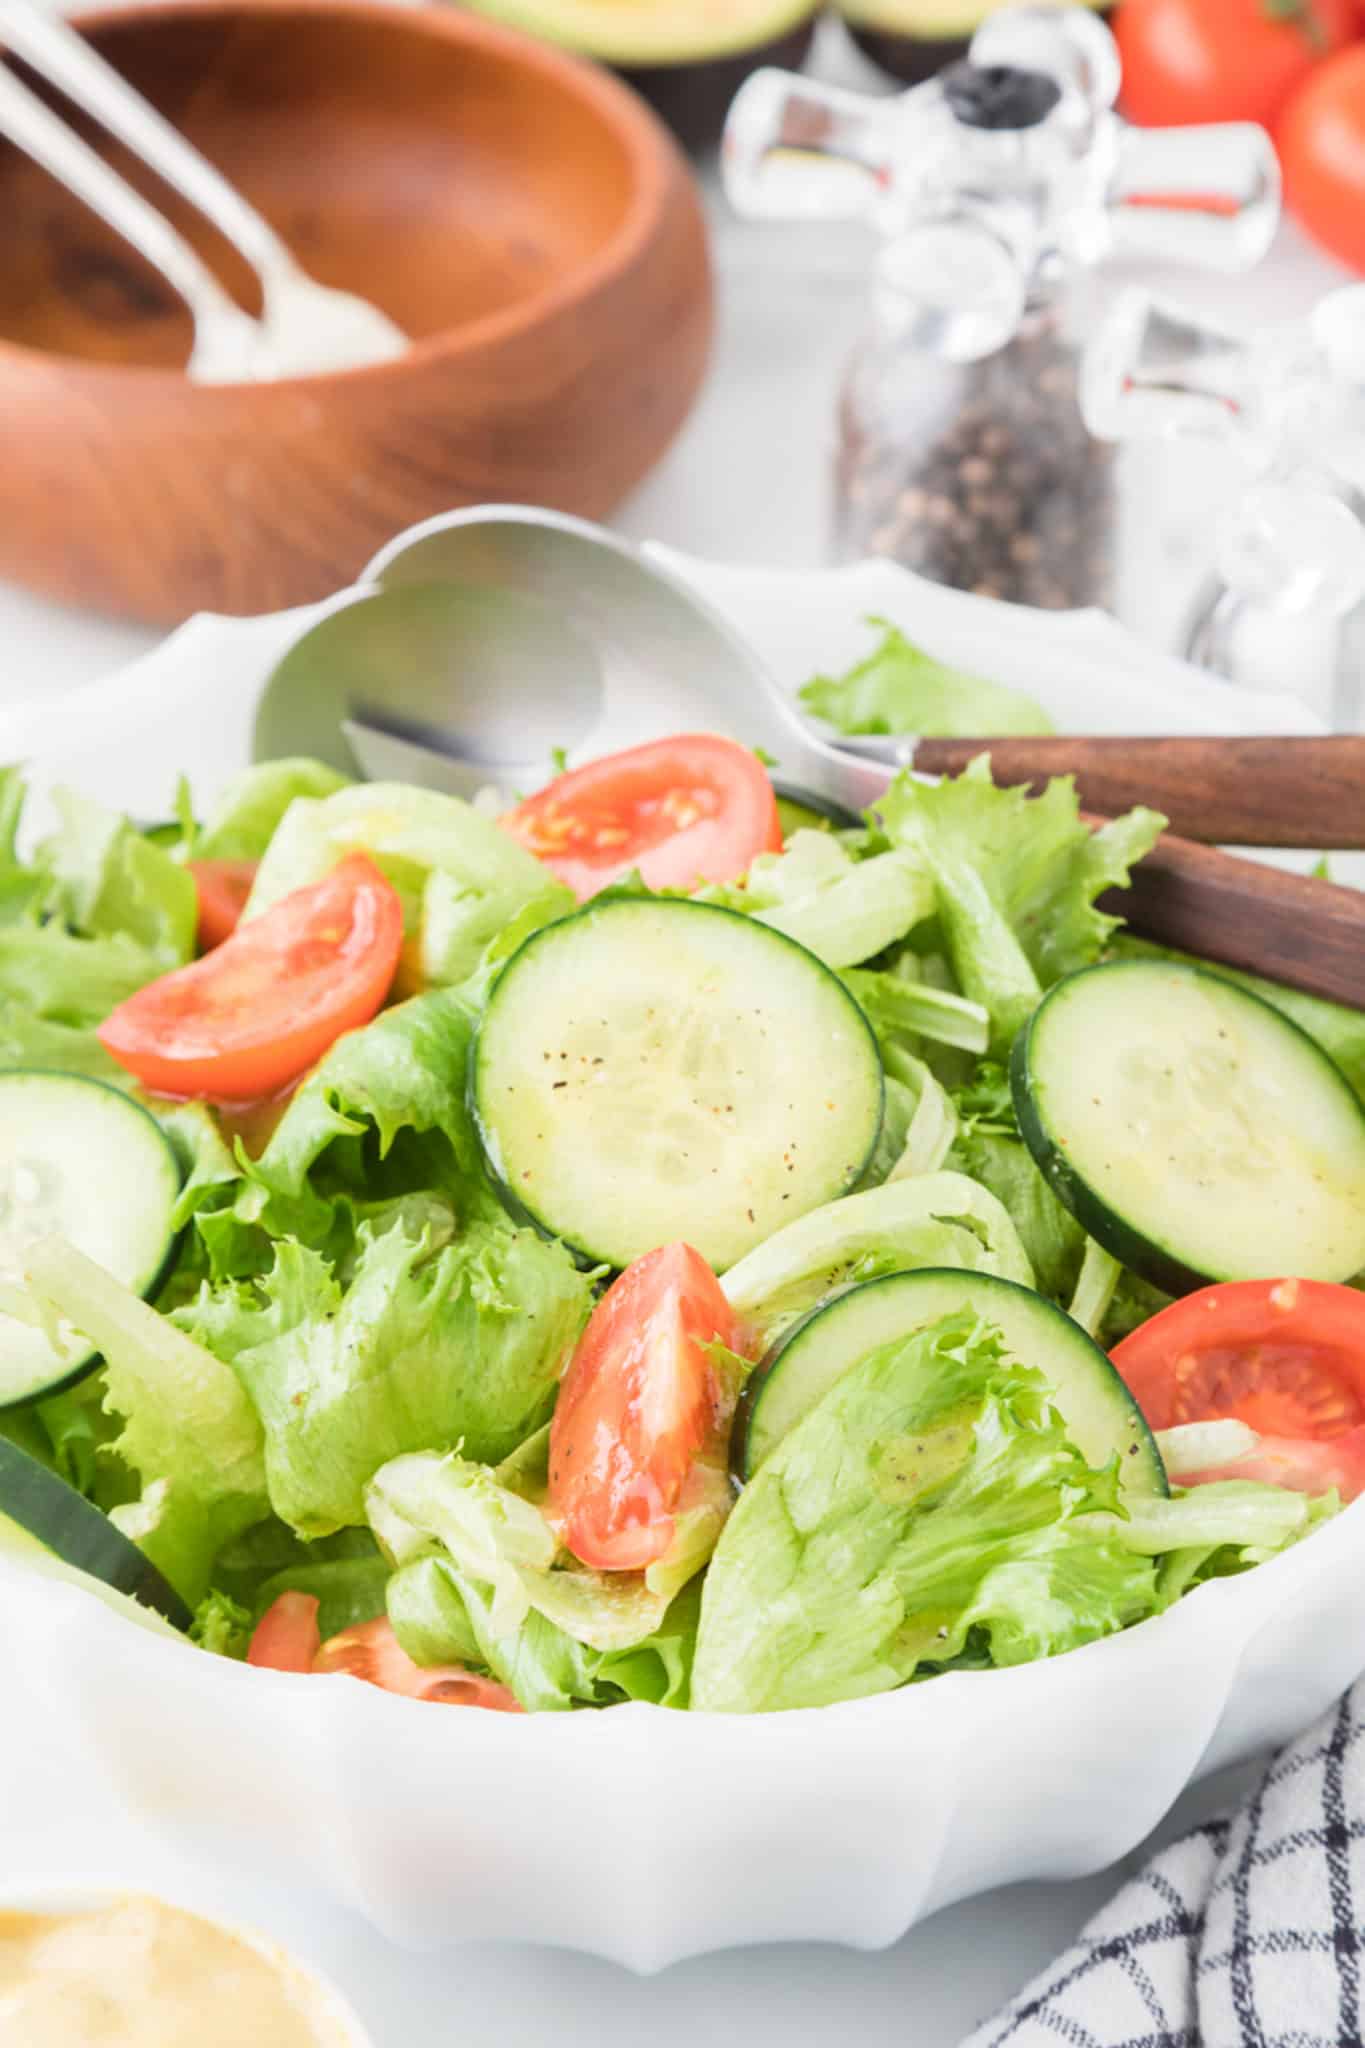 green salad with tomato and cucumbers dressed with honey mustard dressing.